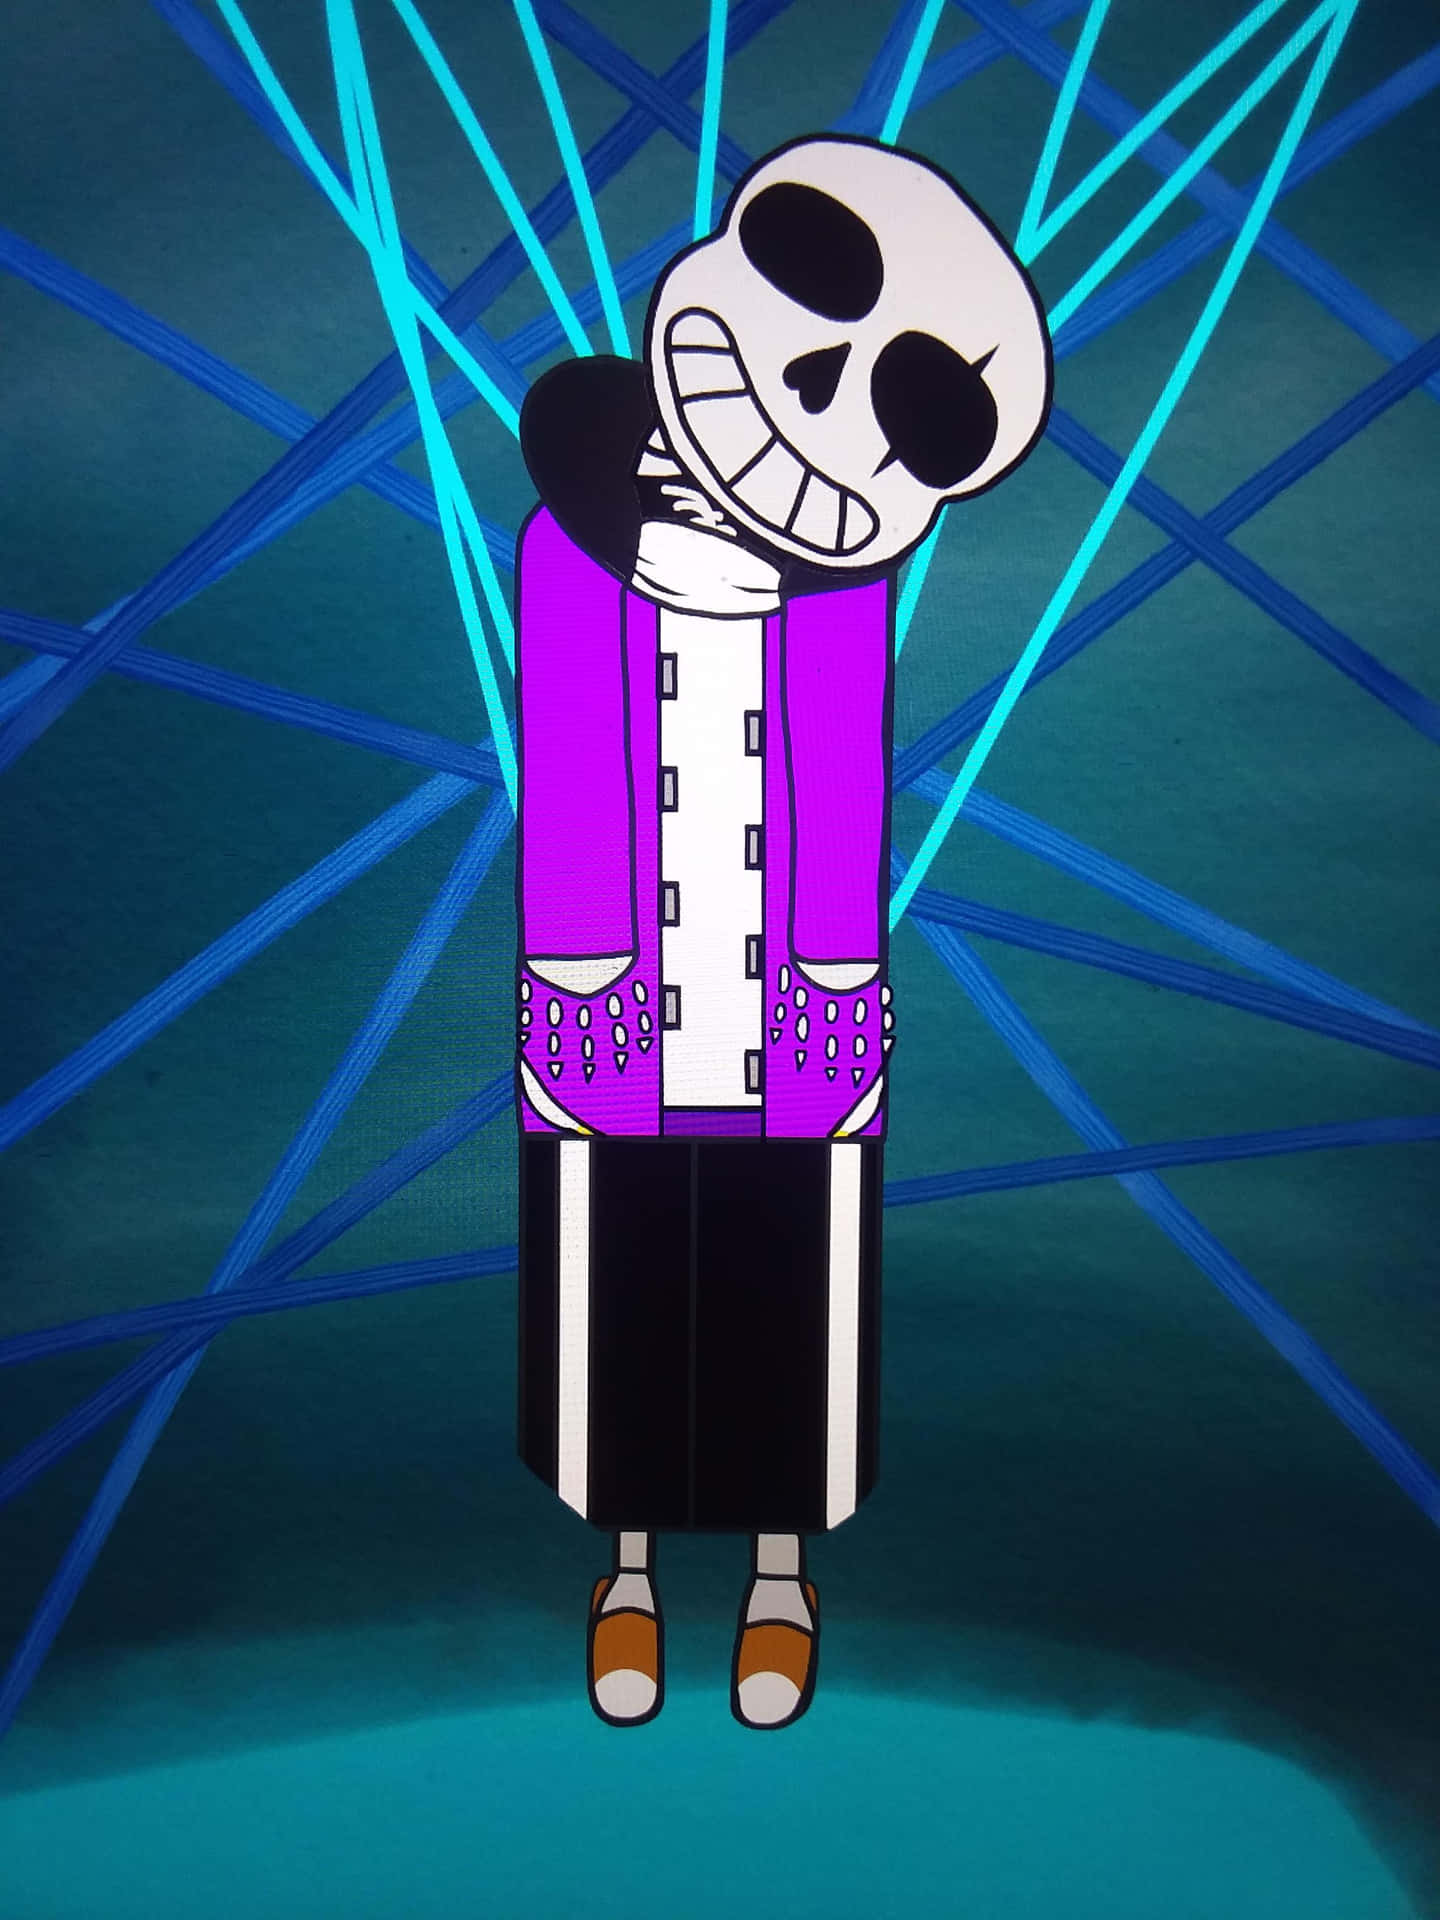 Sans, the enigmatic character from Undertale